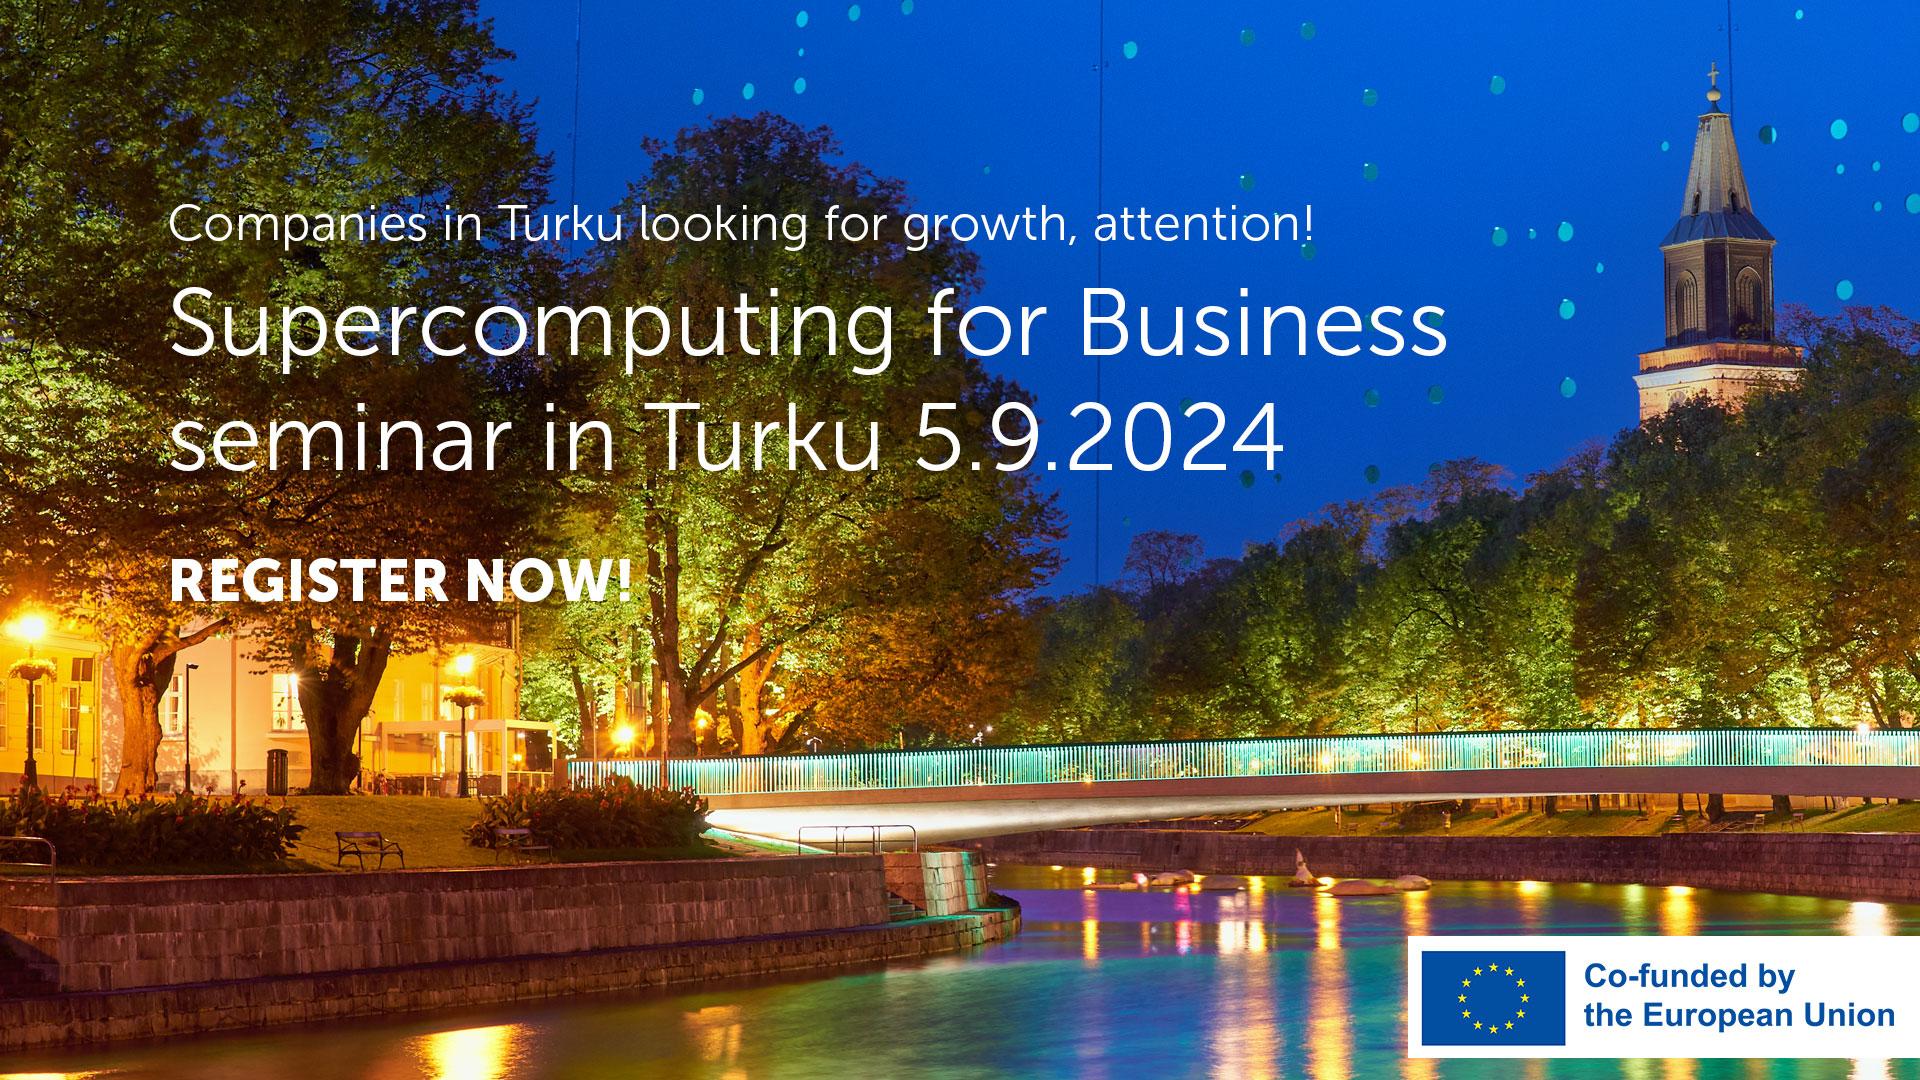 Supercomputing for Business